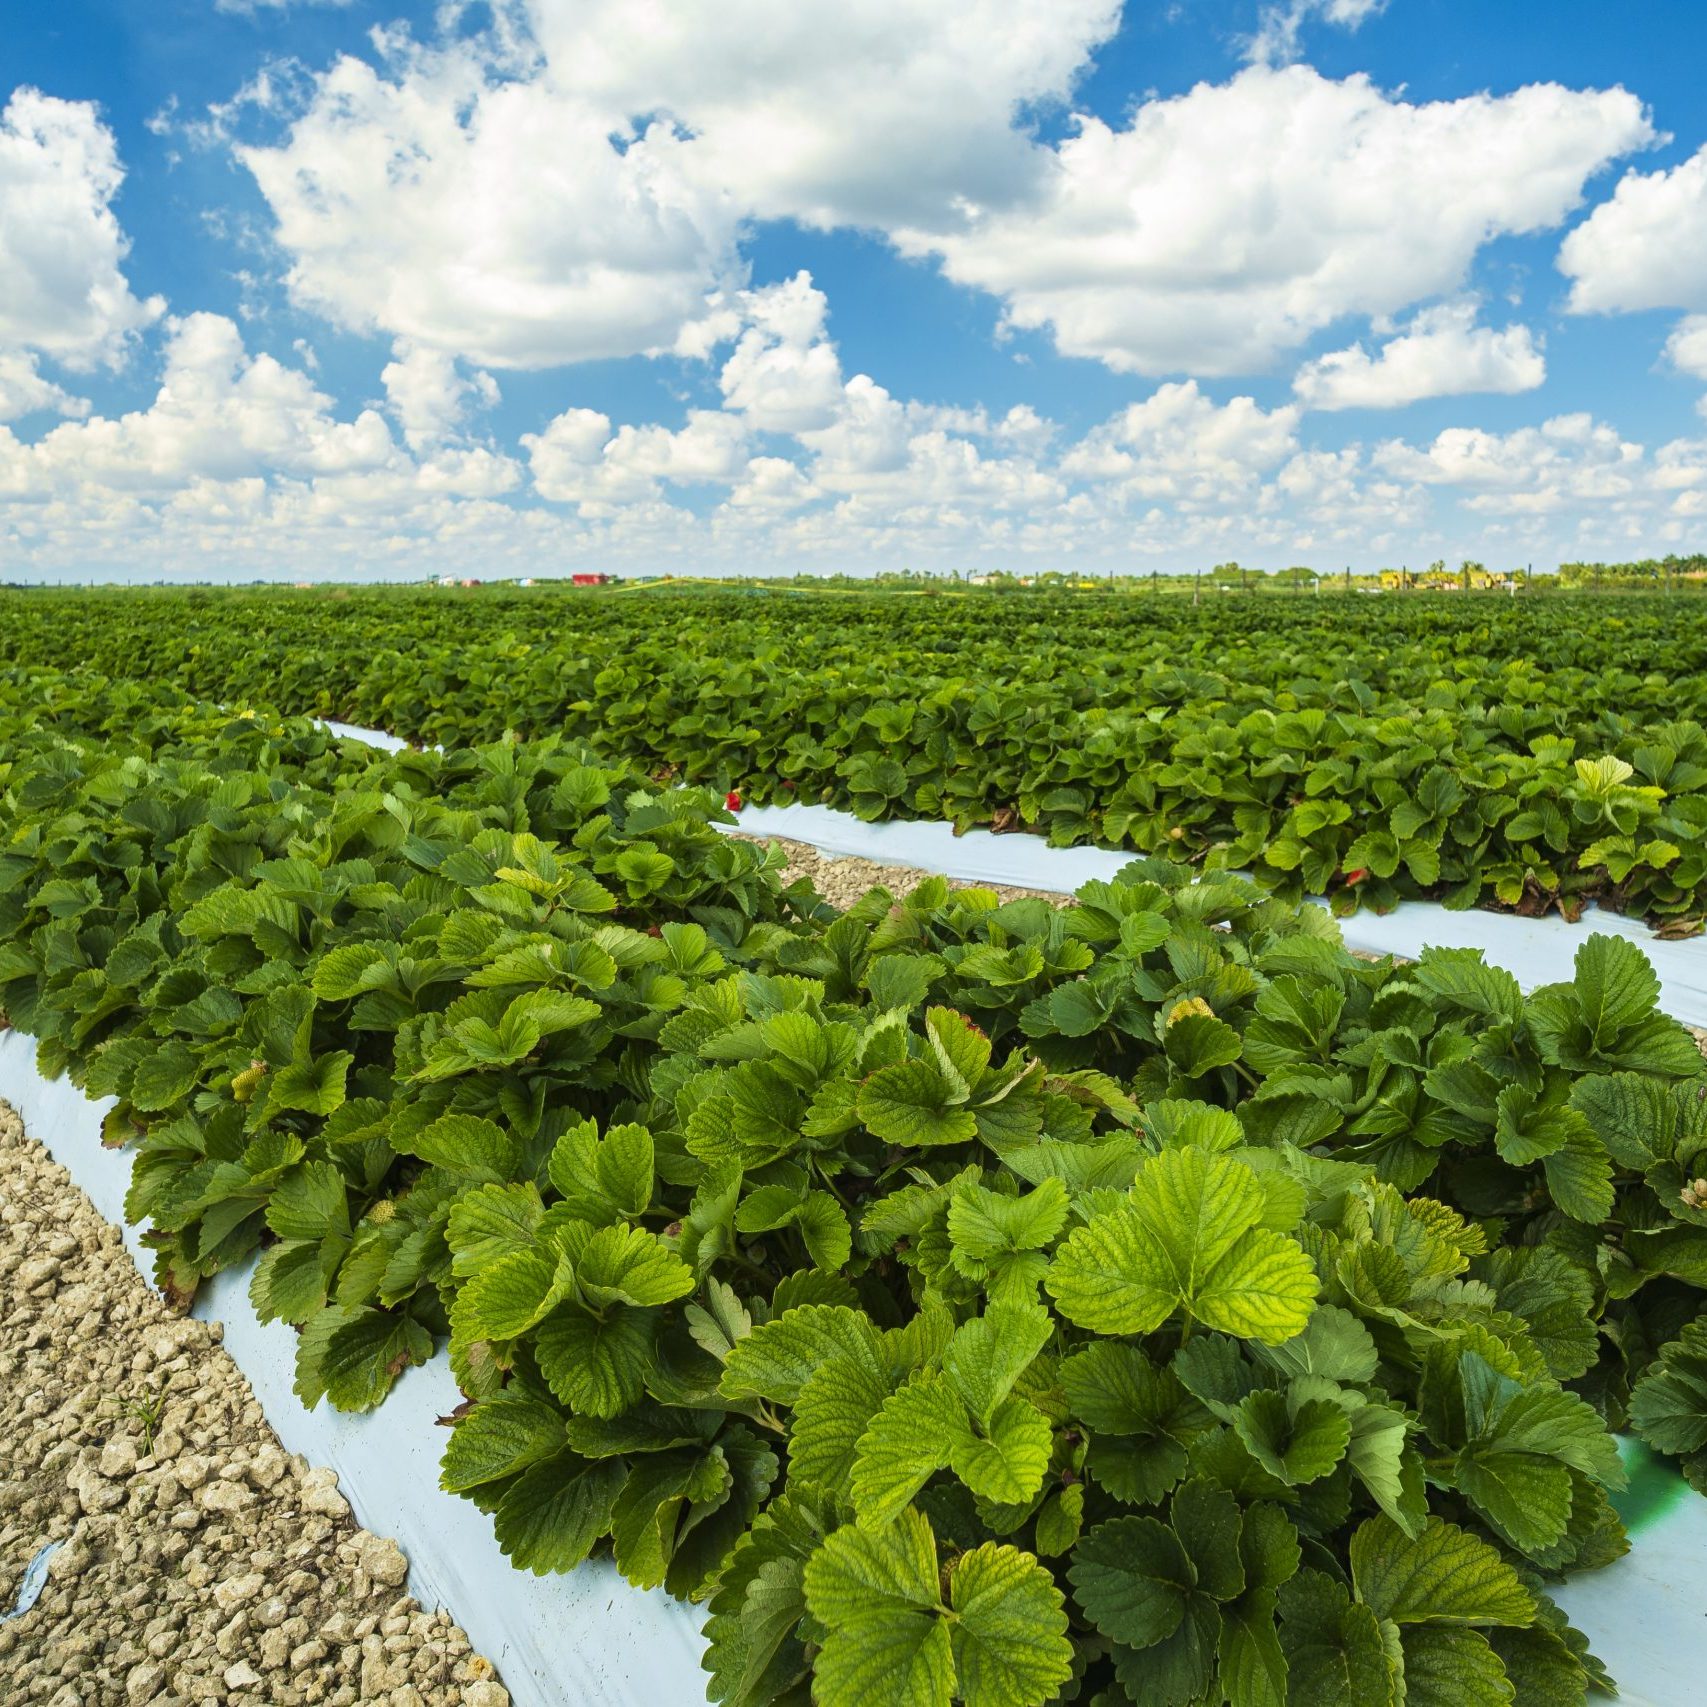 Landscape view of a freshly growing strawberry field.